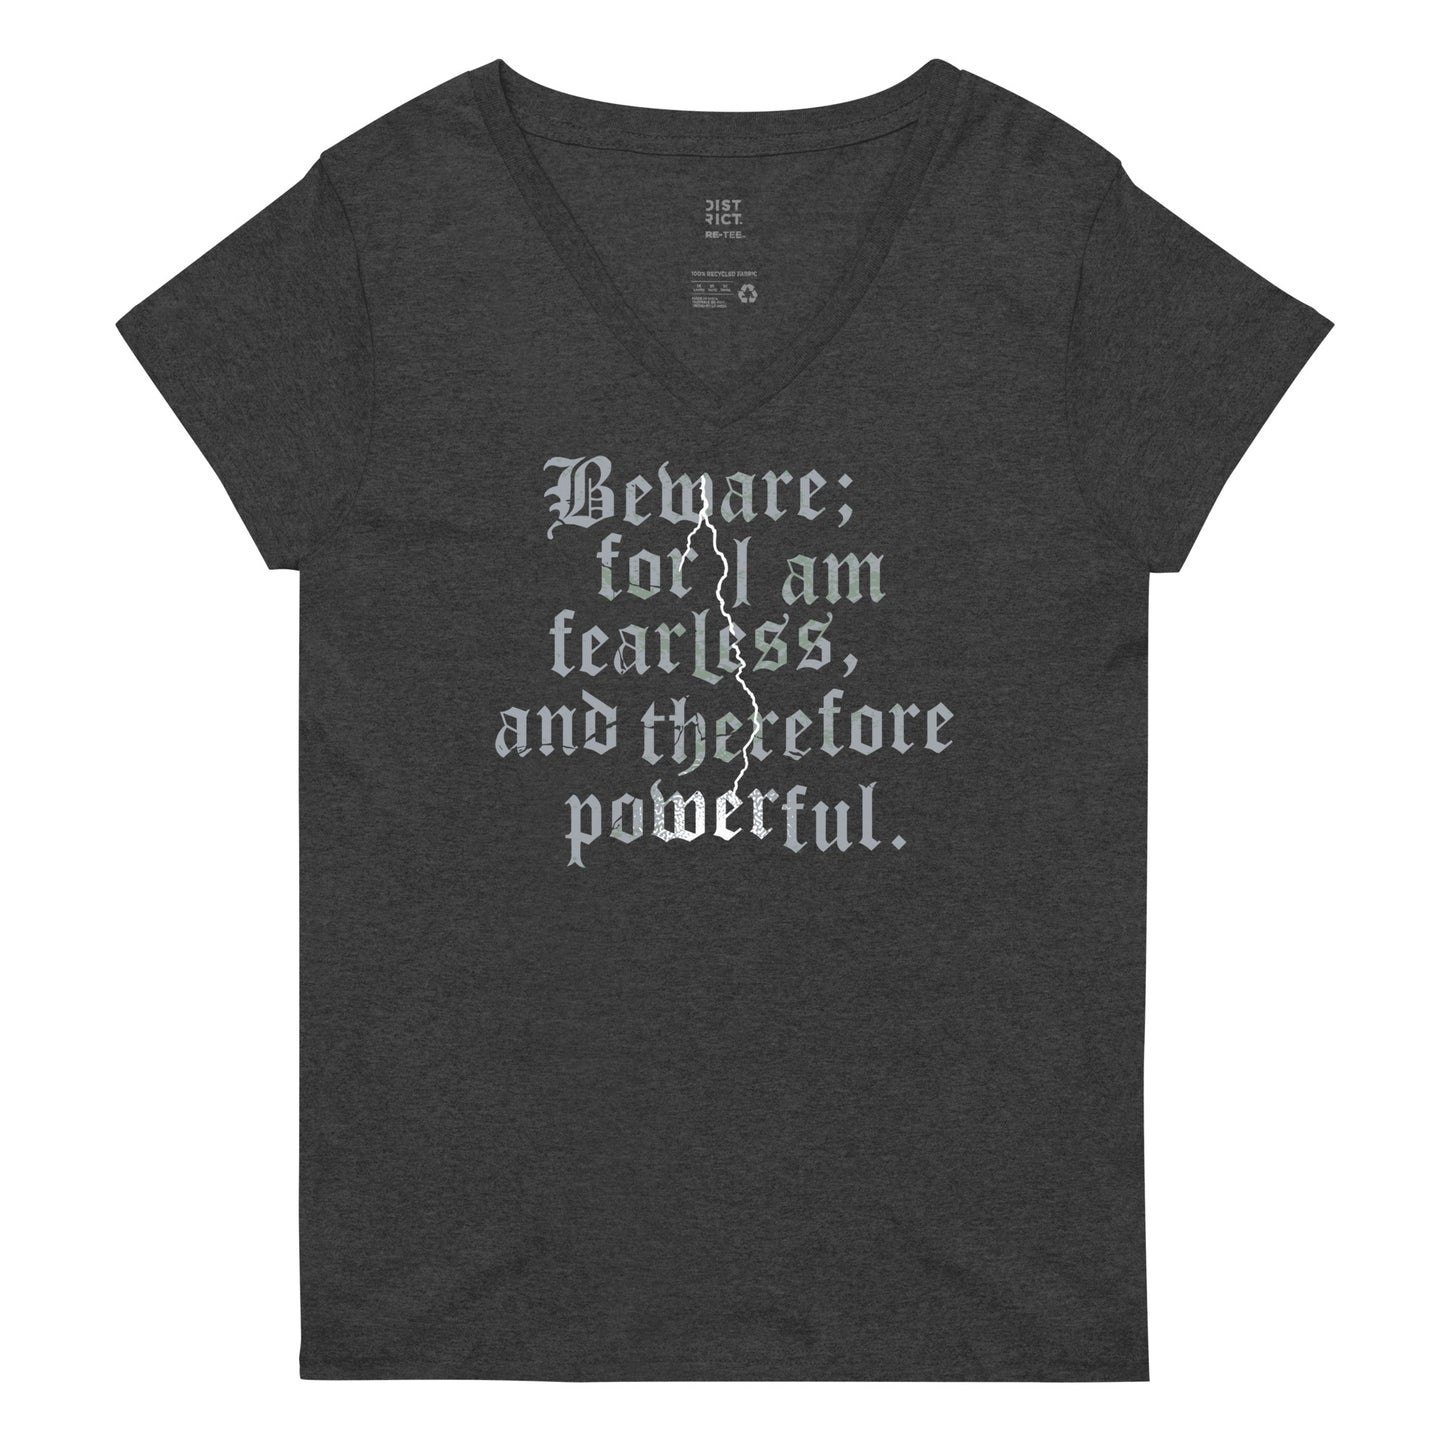 Beware; For I Am Fearless, And Therefore Powerful Women's V-Neck Tee